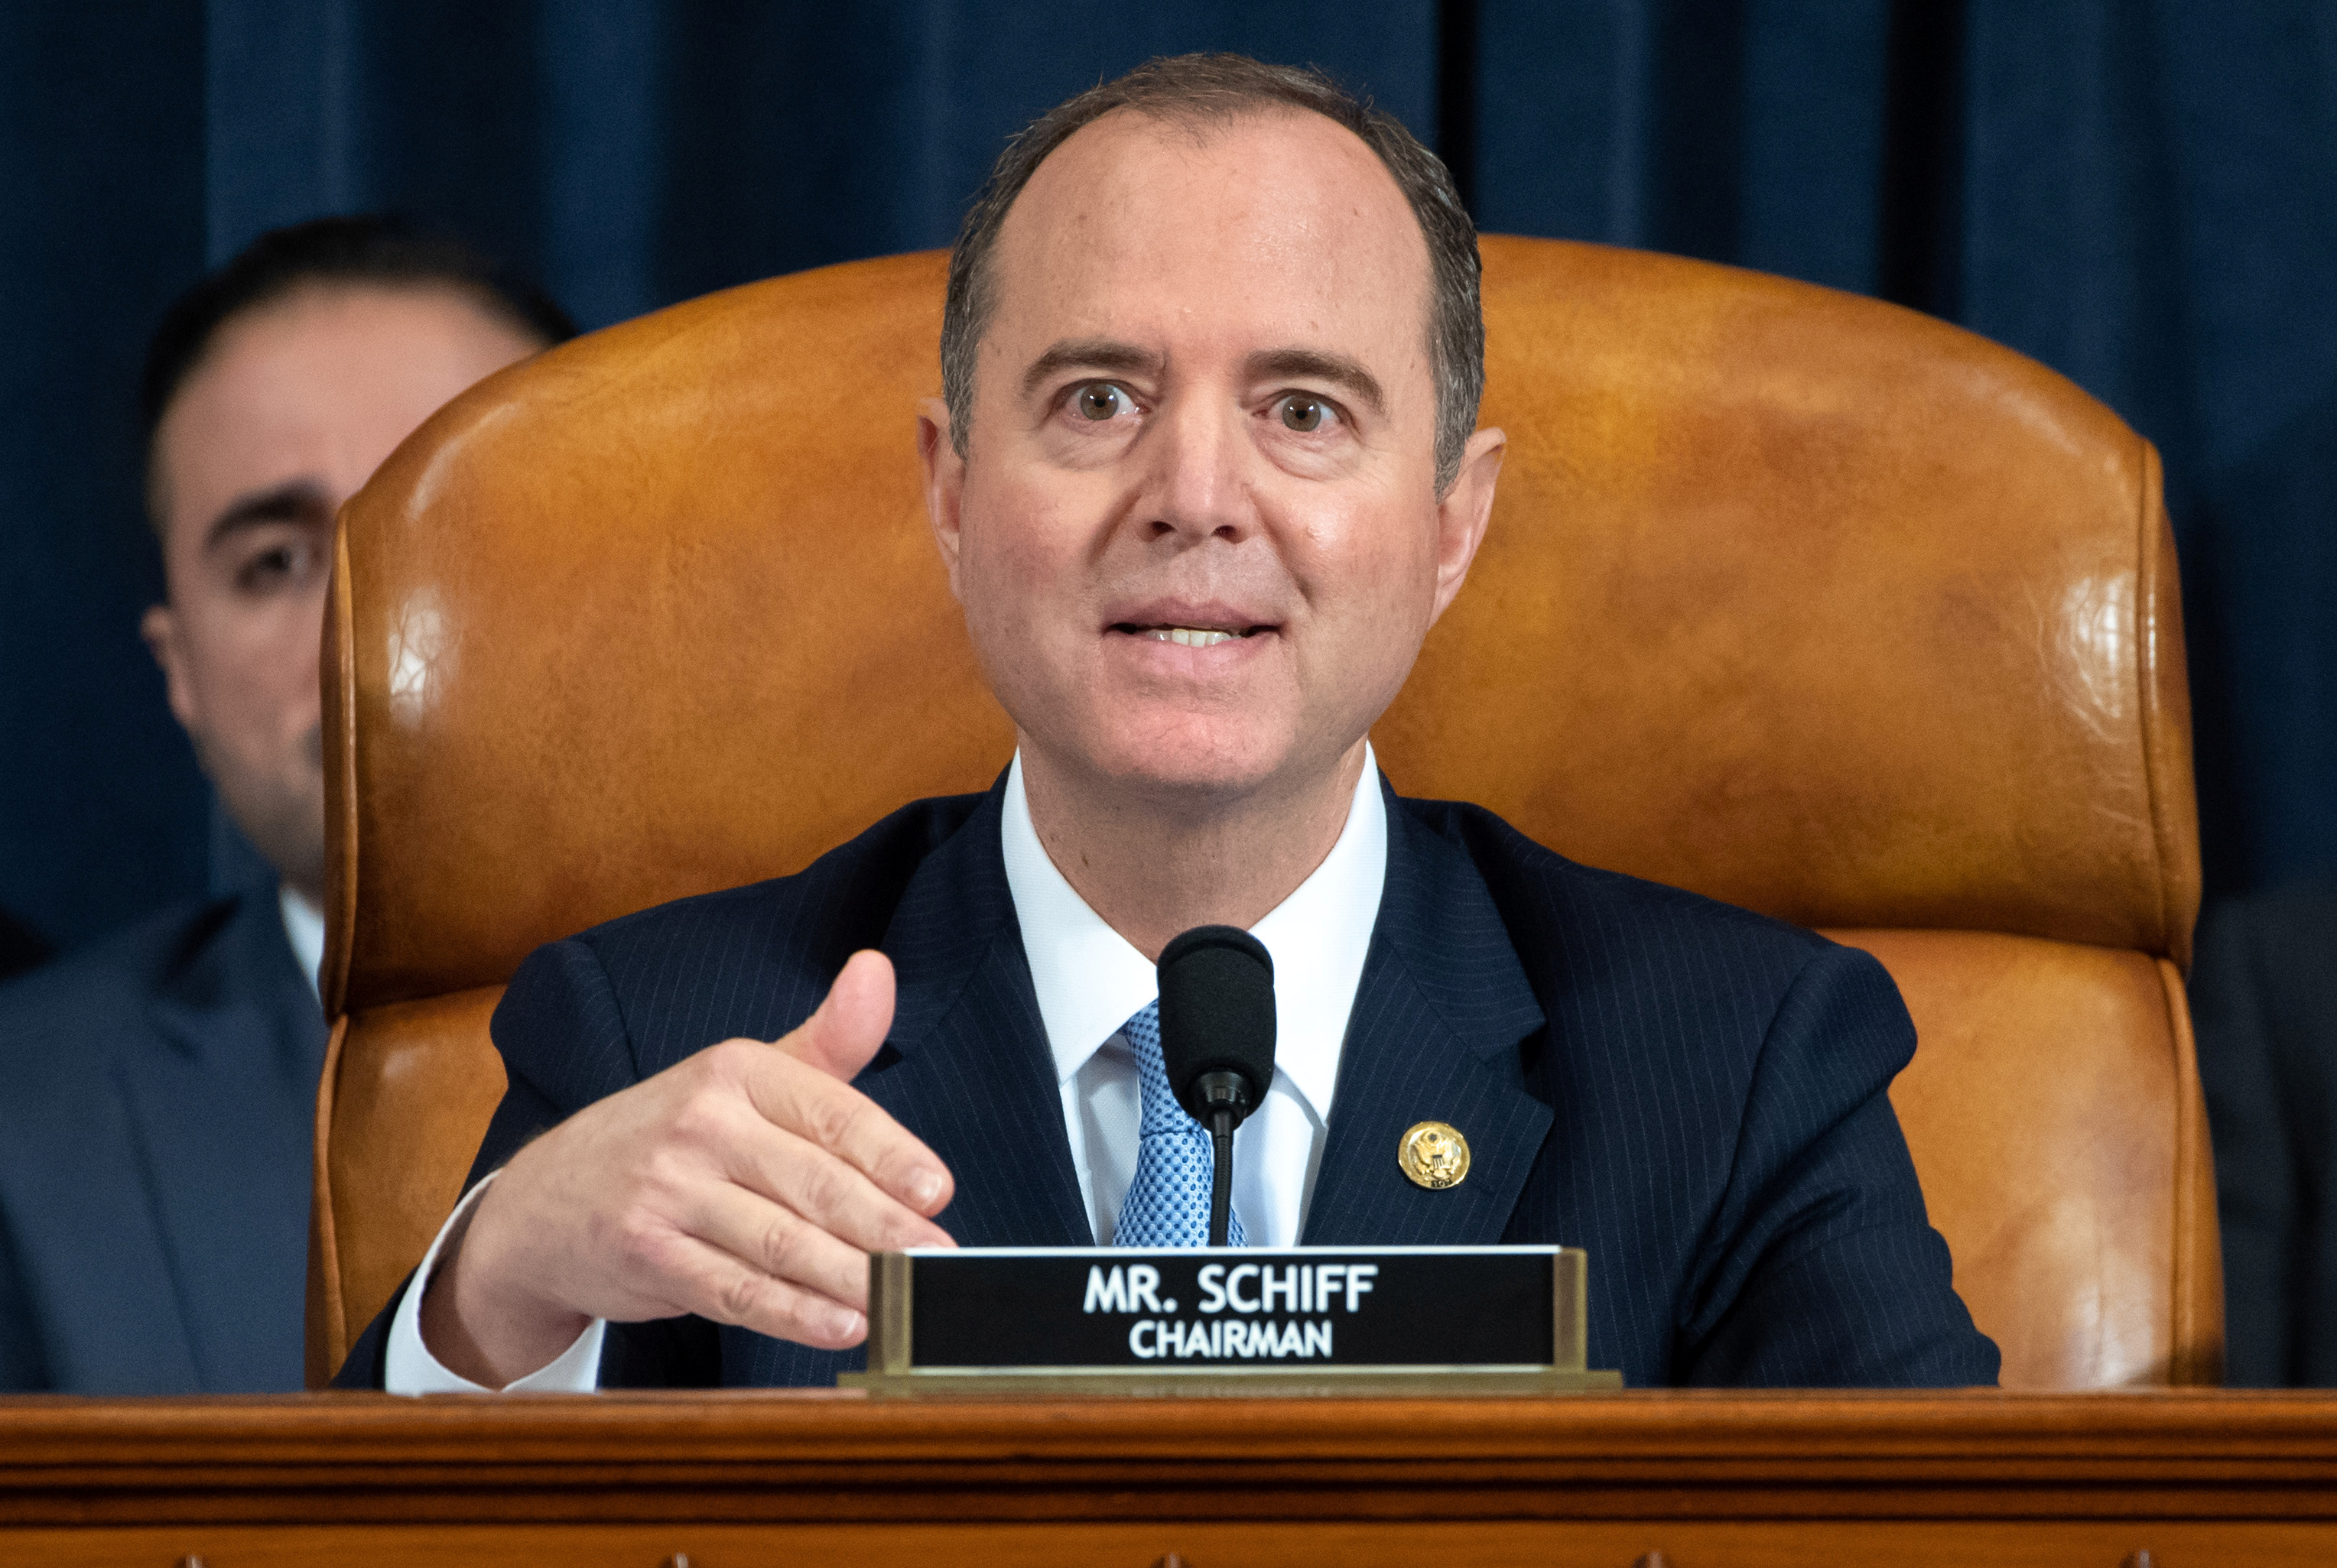 Chairman Adam Schiff, Democrat of California, speaks during the first public hearings held by the House Permanent Select Committee on Intelligence as part of the impeachment inquiry into U.S. President Donald Trump, with witnesses Ukrainian Ambassador William Taylor and Deputy Assistant Secretary George Kent testifying, on Capitol Hill in Washington, DC, U.S., Nov.13, 2019. Saul Loeb/Pool via REUTERS 